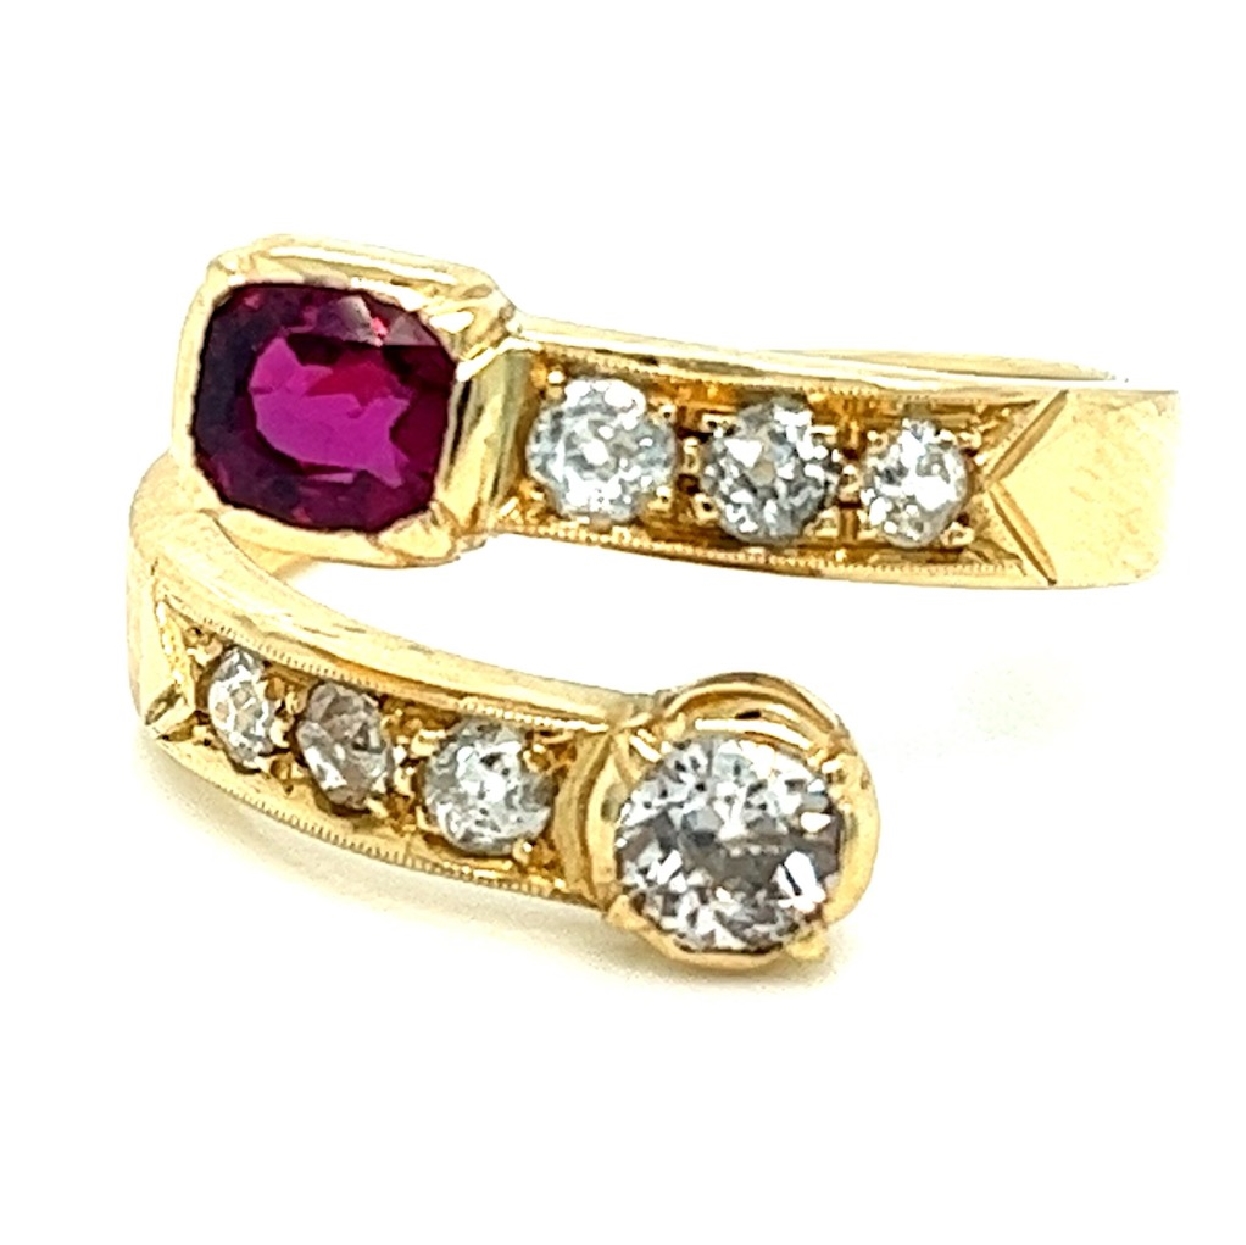 14K Yellow Gold Antique Ruby and Diamond Ring Size 8